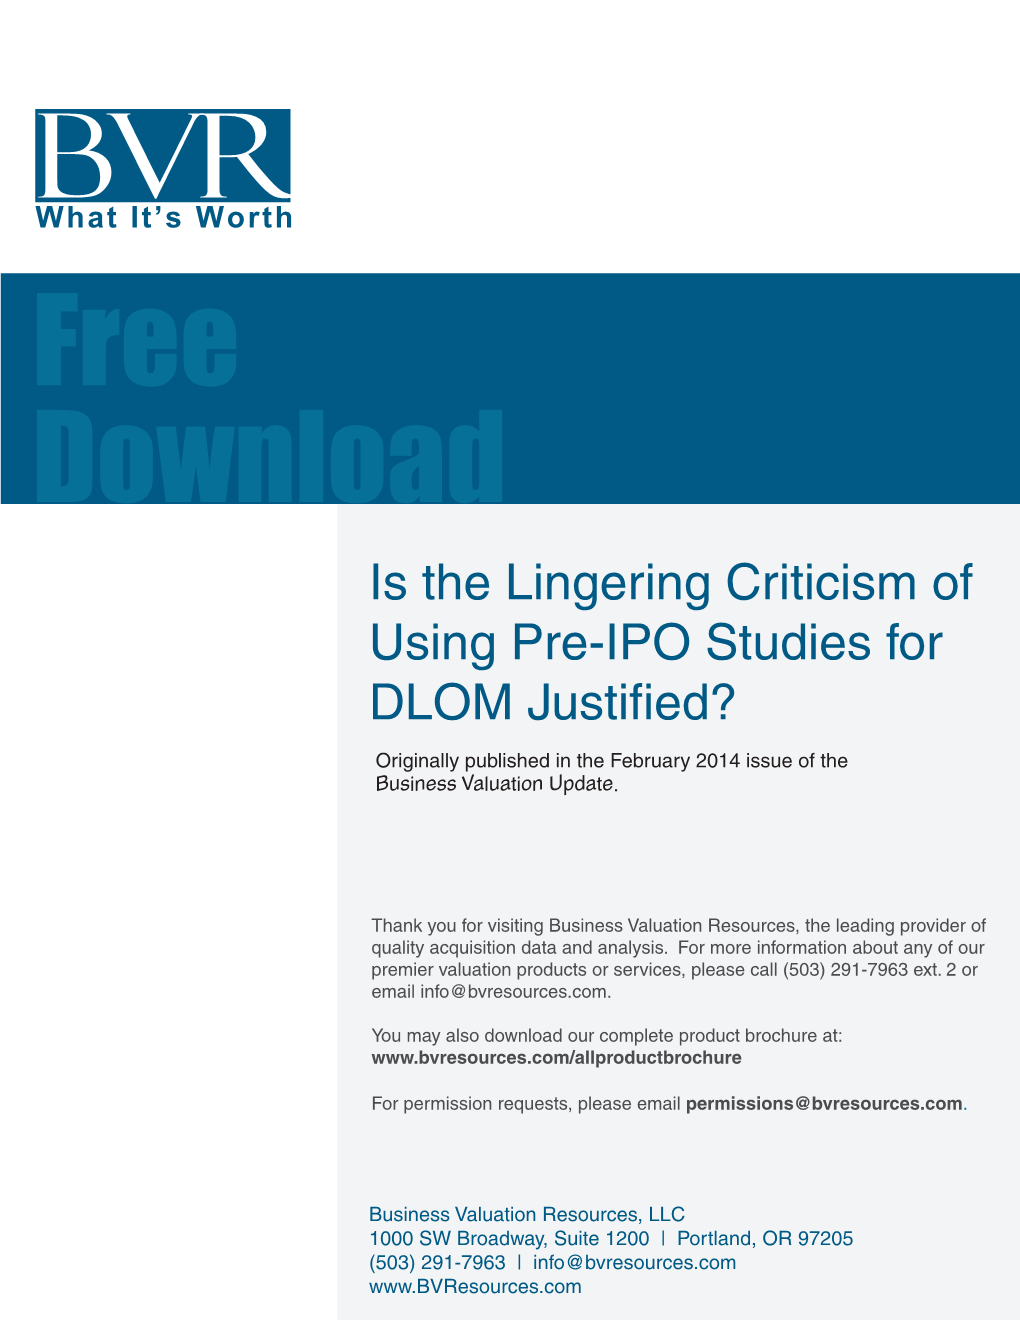 Is the Lingering Criticism of Using Pre-IPO Studies for DLOM Justified?